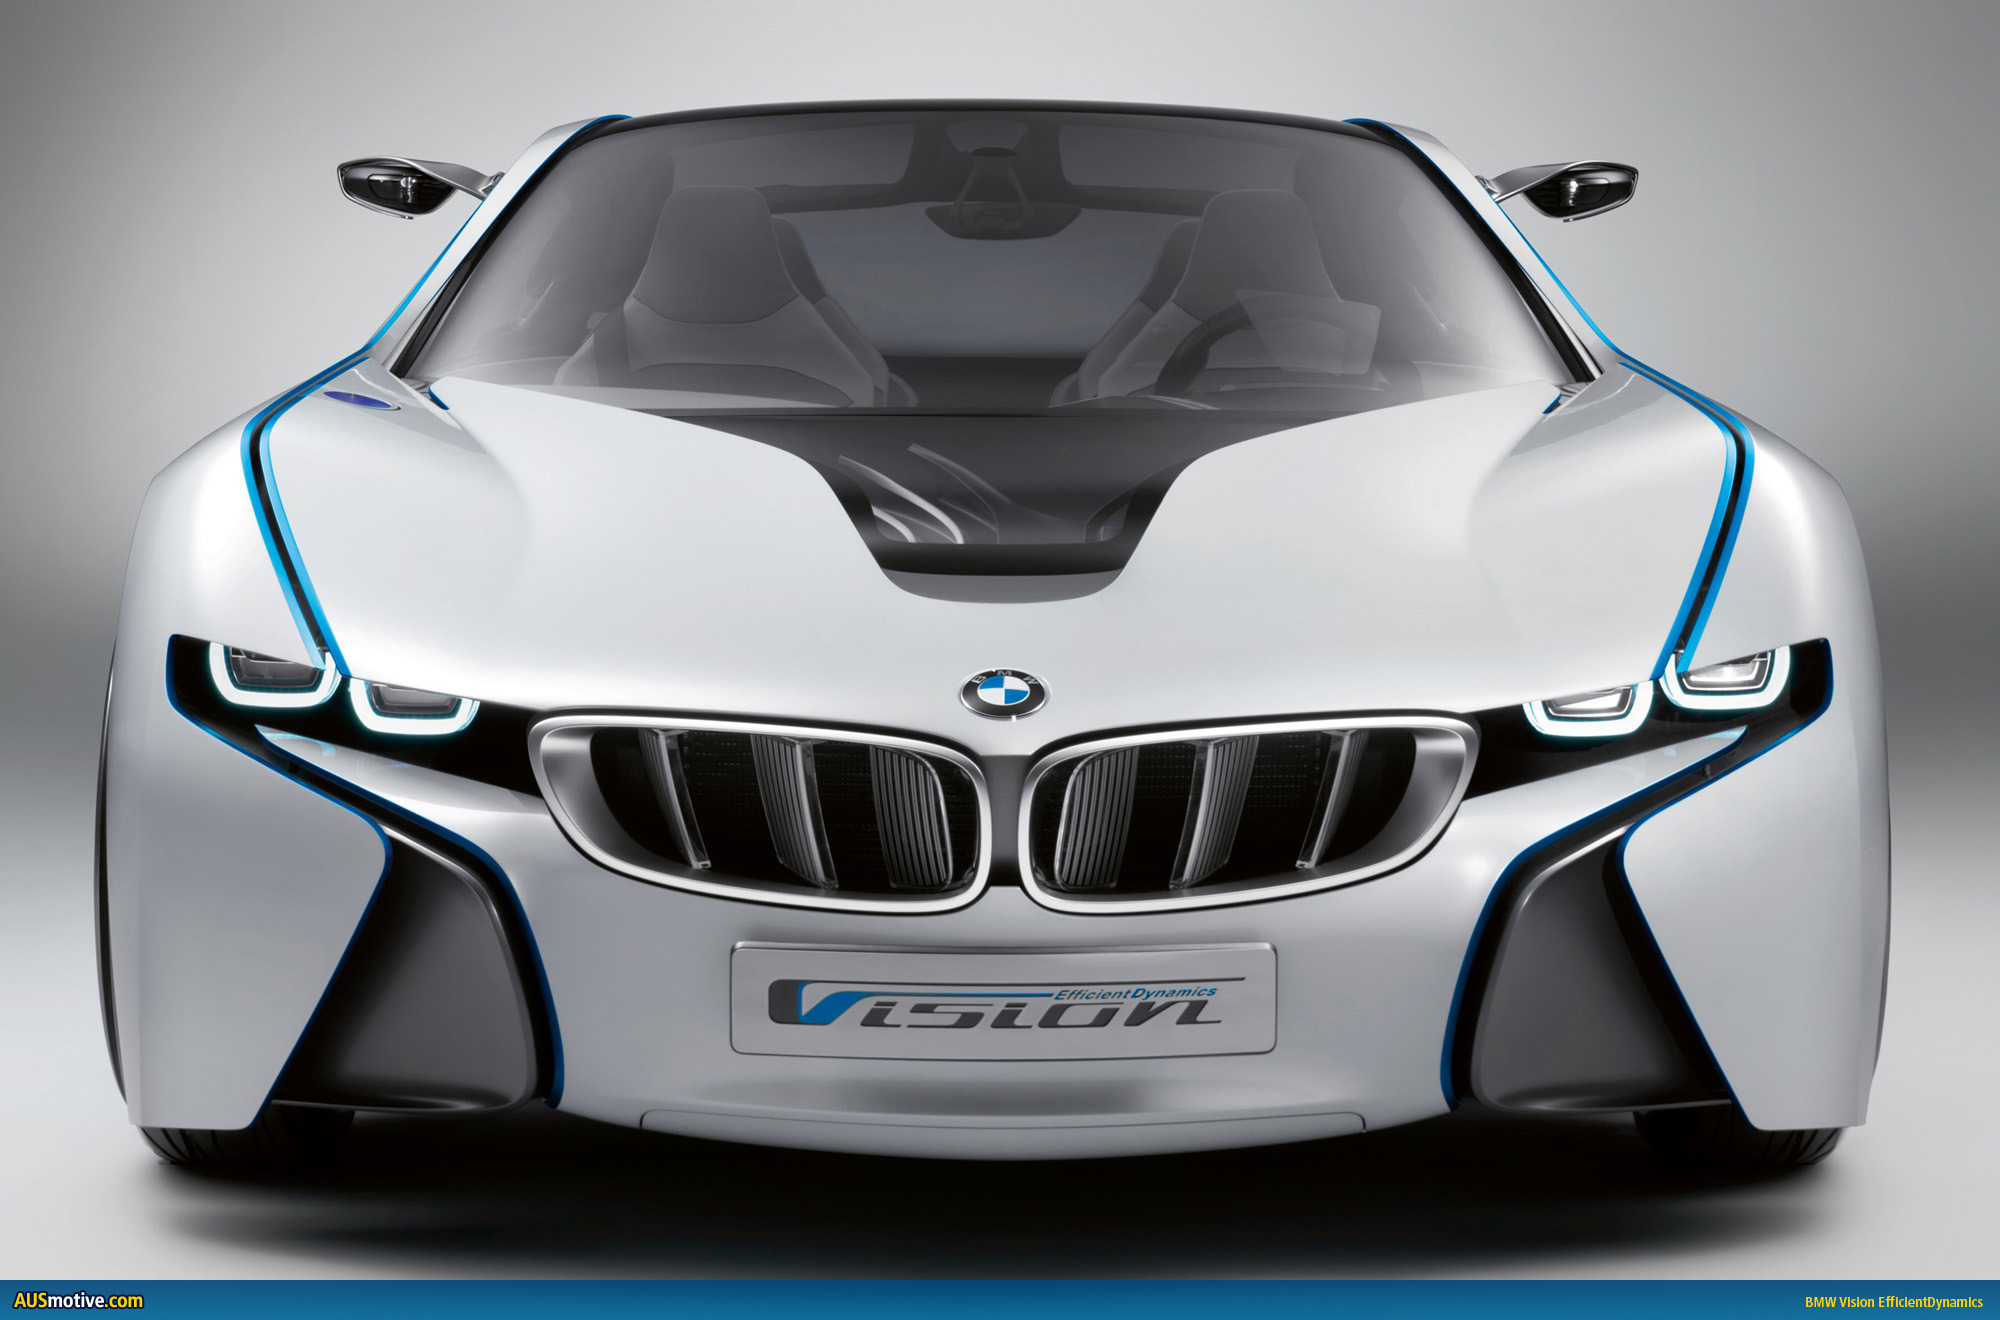 How much is the bmw vision efficientdynamics #3